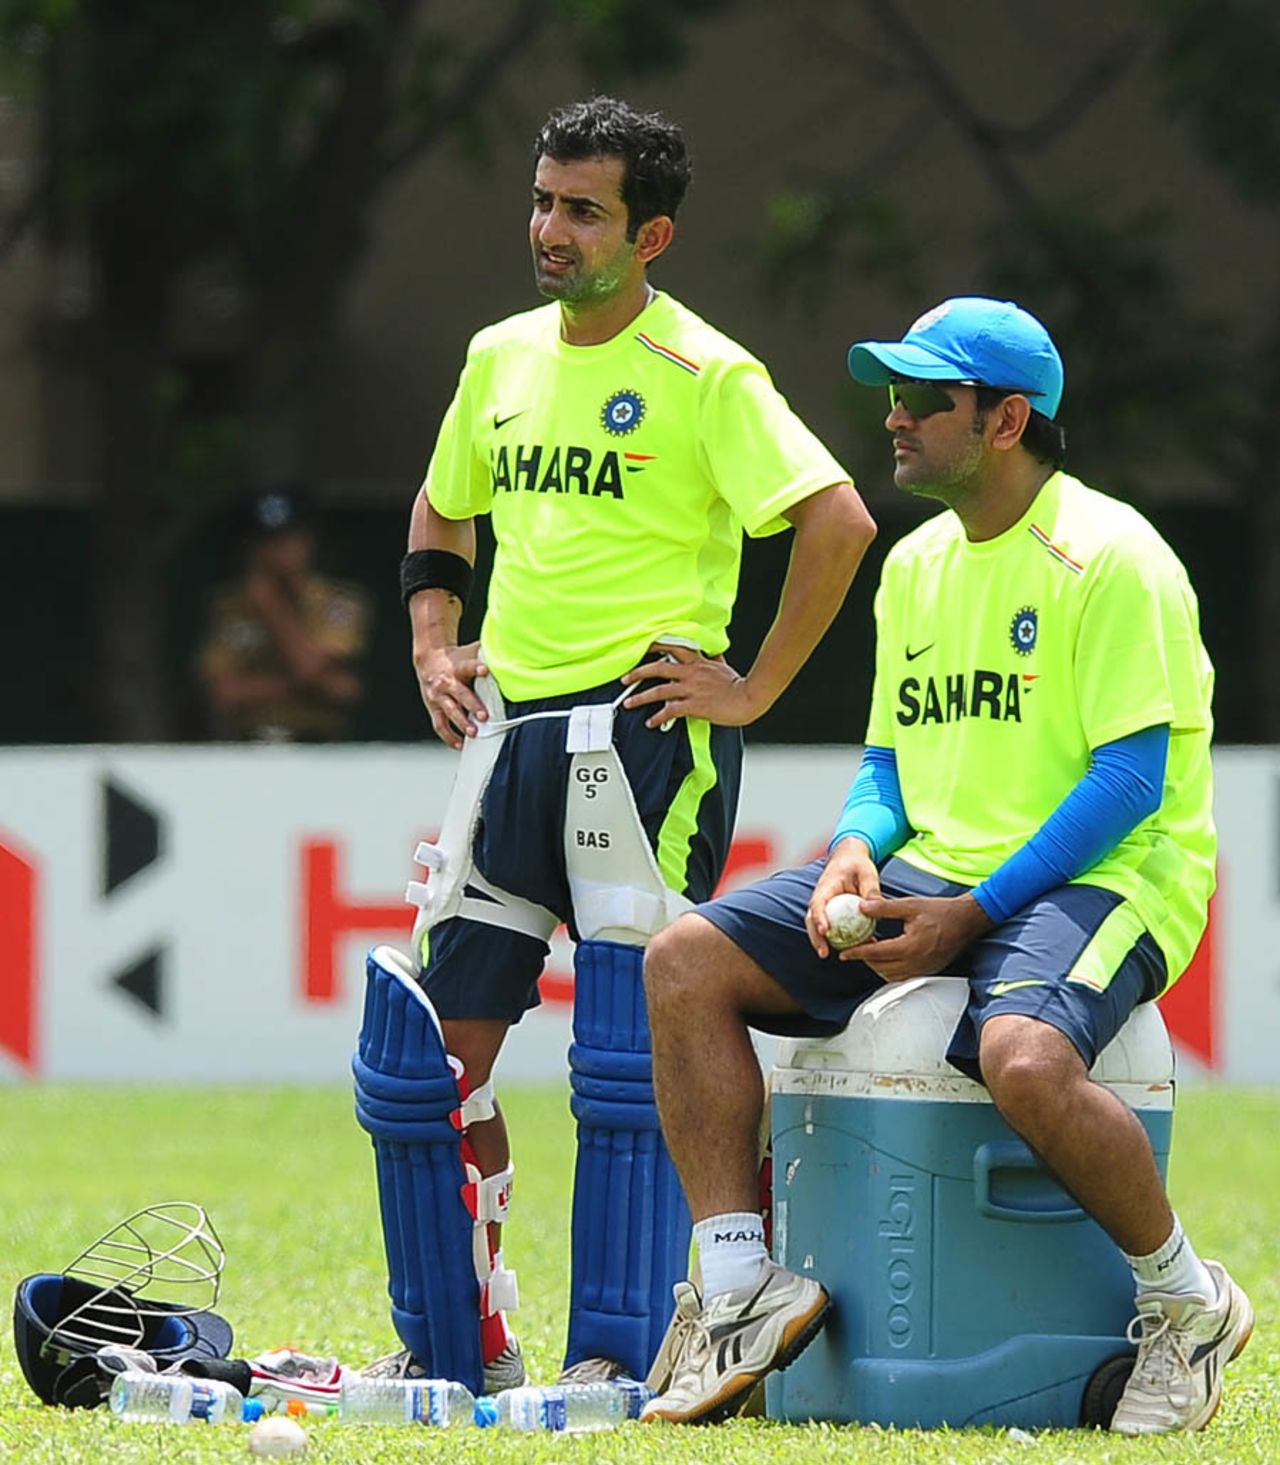 Gautam Gambhir and MS Dhoni at practice ahead of the World Twenty20 game against Afghanistan, Colombo, September 18, 2012